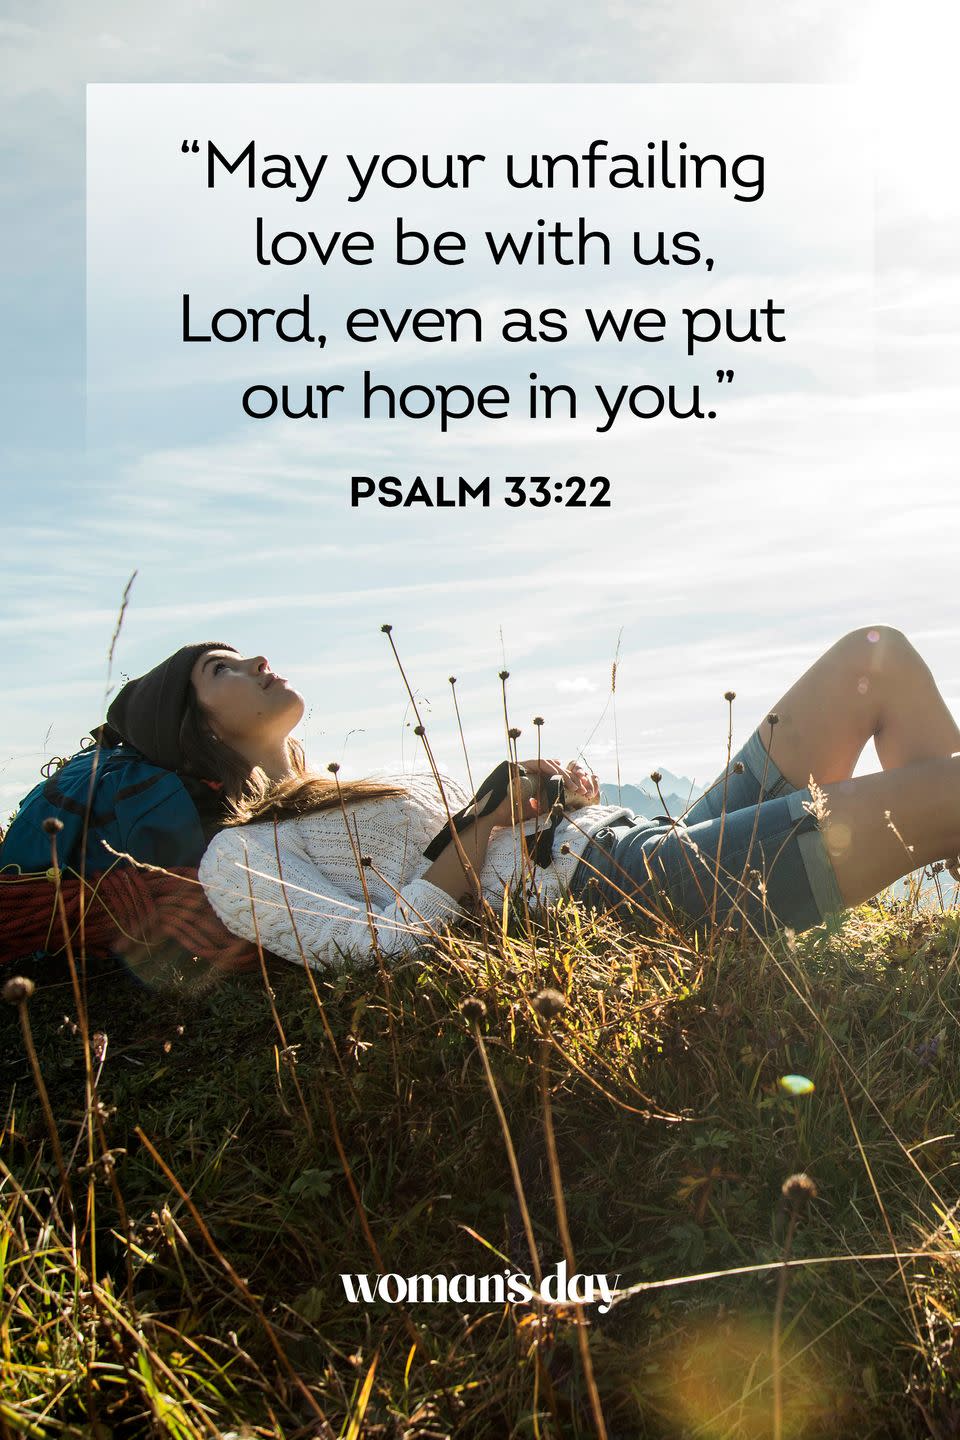 <p>“May your unfailing love be with us, Lord, even as we put our hope in you.” </p><p><strong>The Good News: </strong>God’s love is always with us.</p>